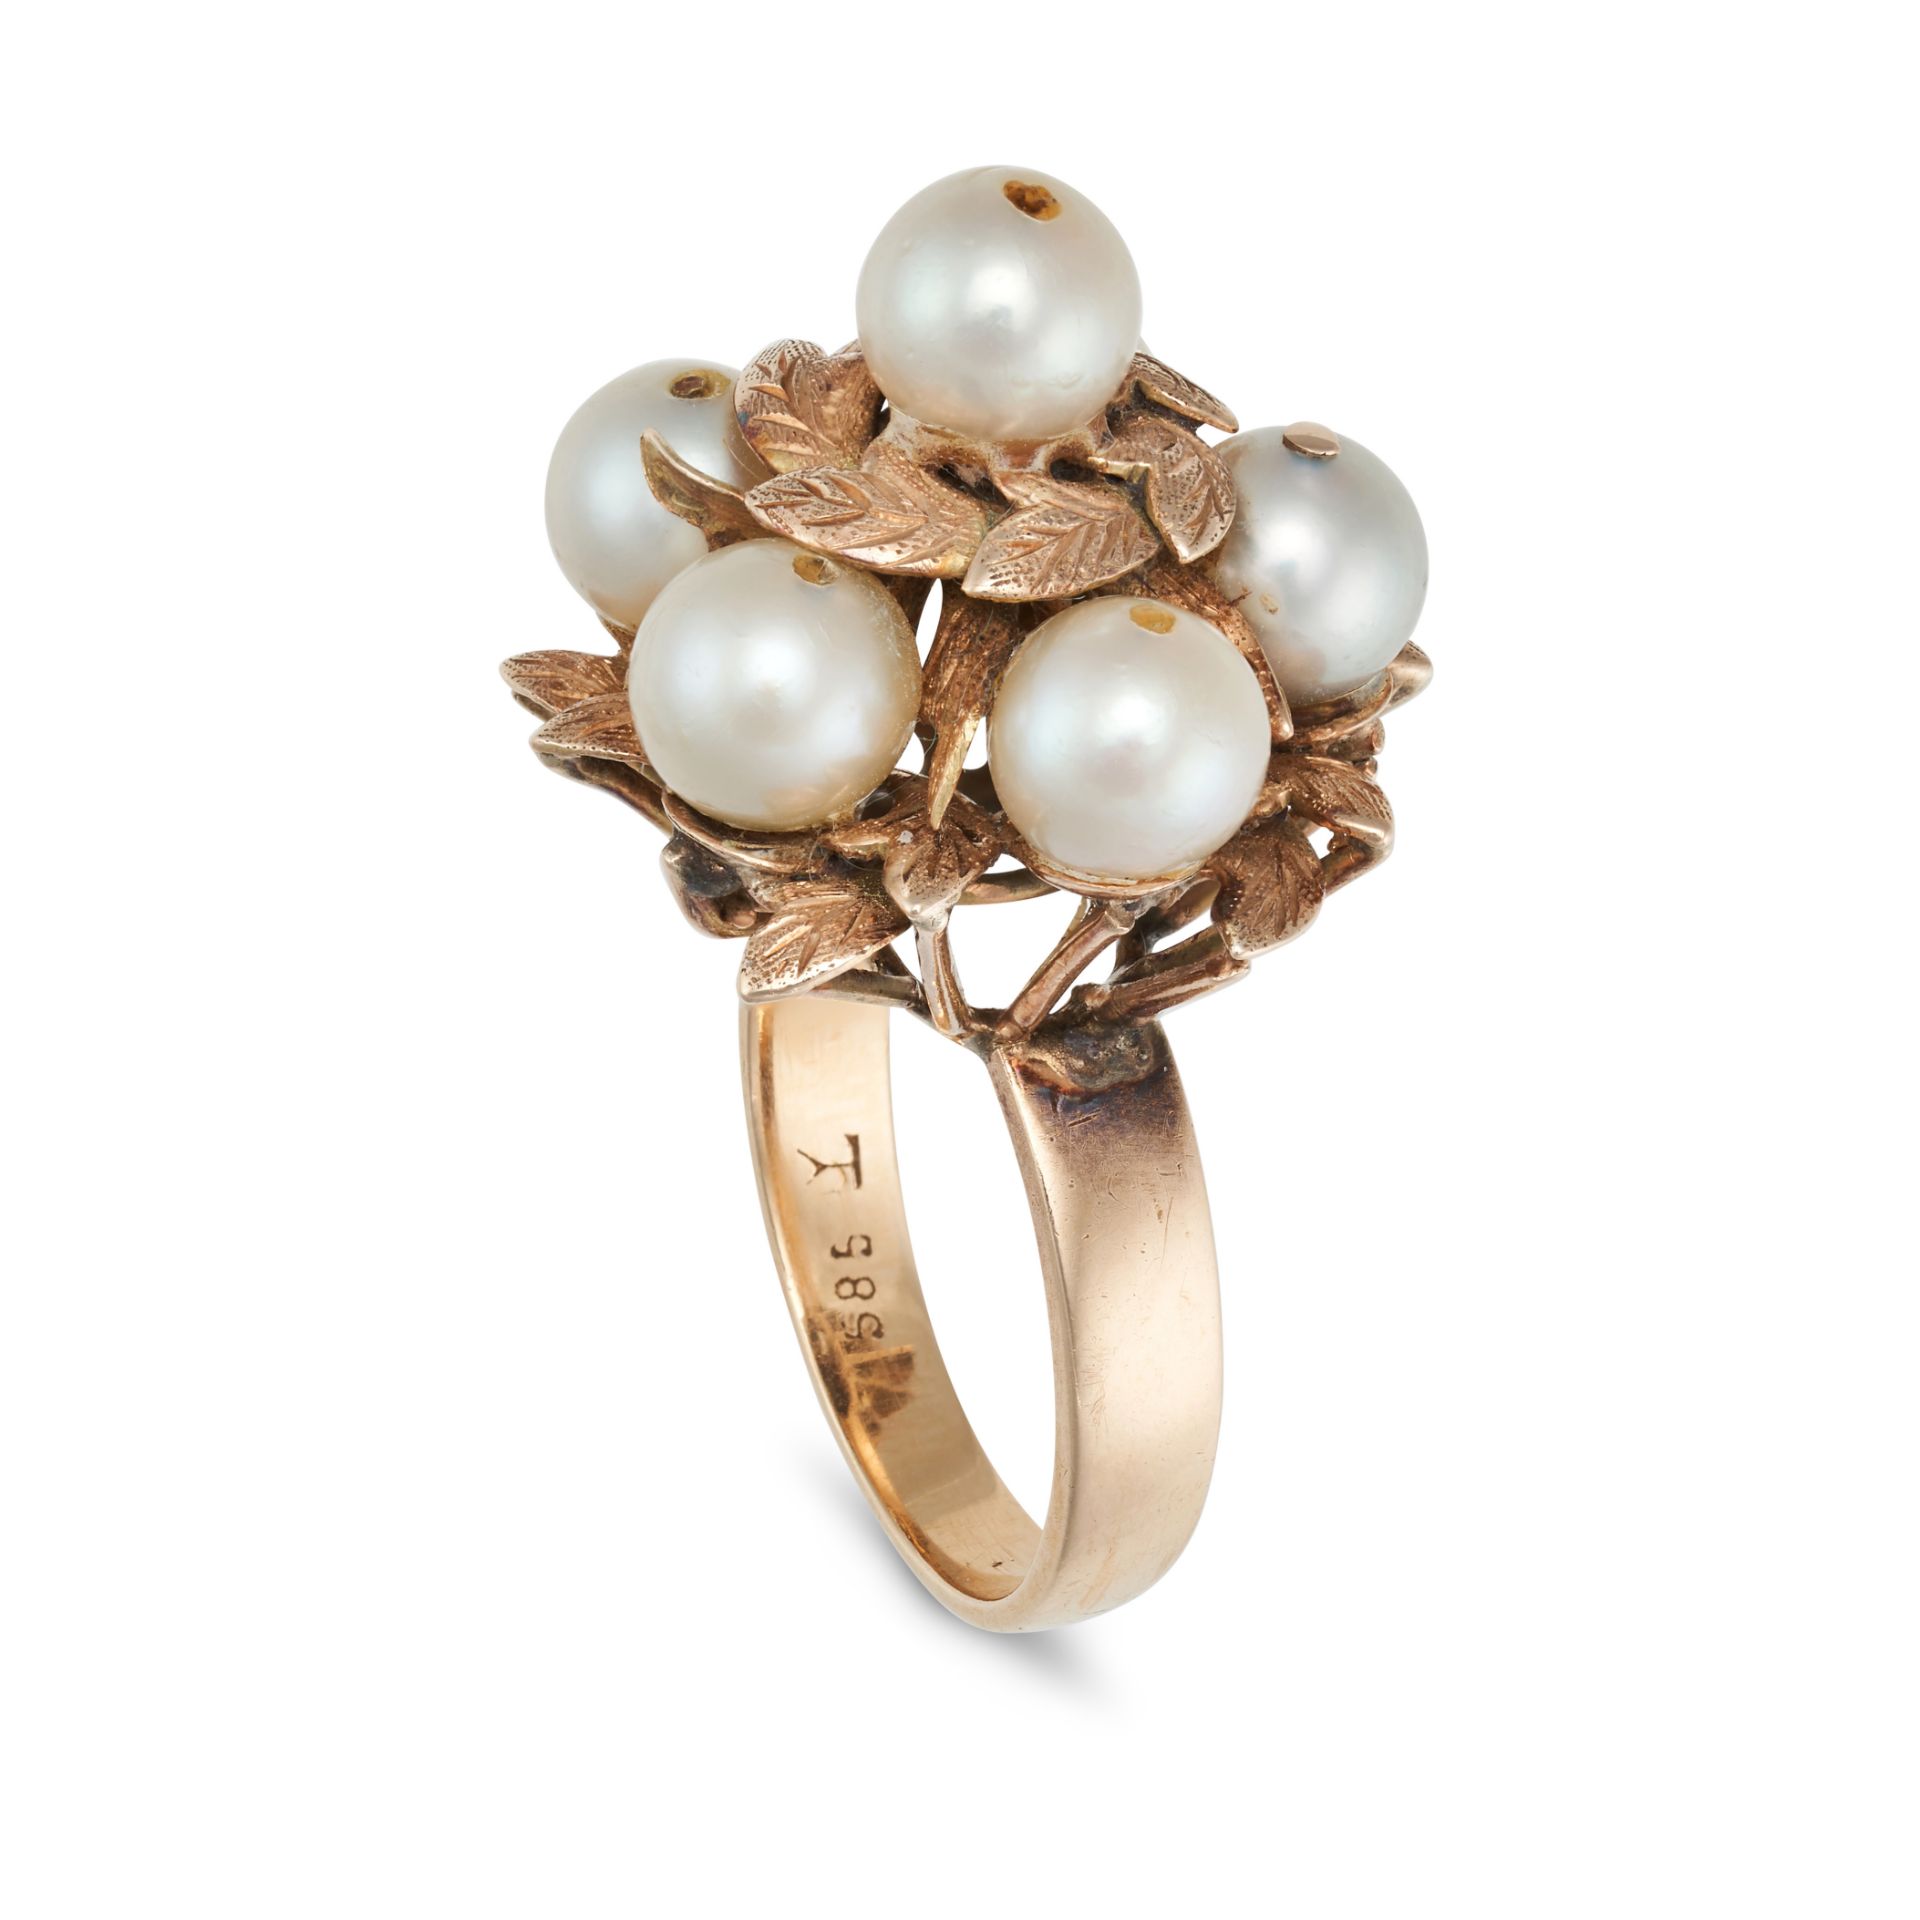 A PEARL LEAF RING designed as a spray of leaves set with six pearls, stamped 585, size L / 5.75, ... - Image 2 of 2